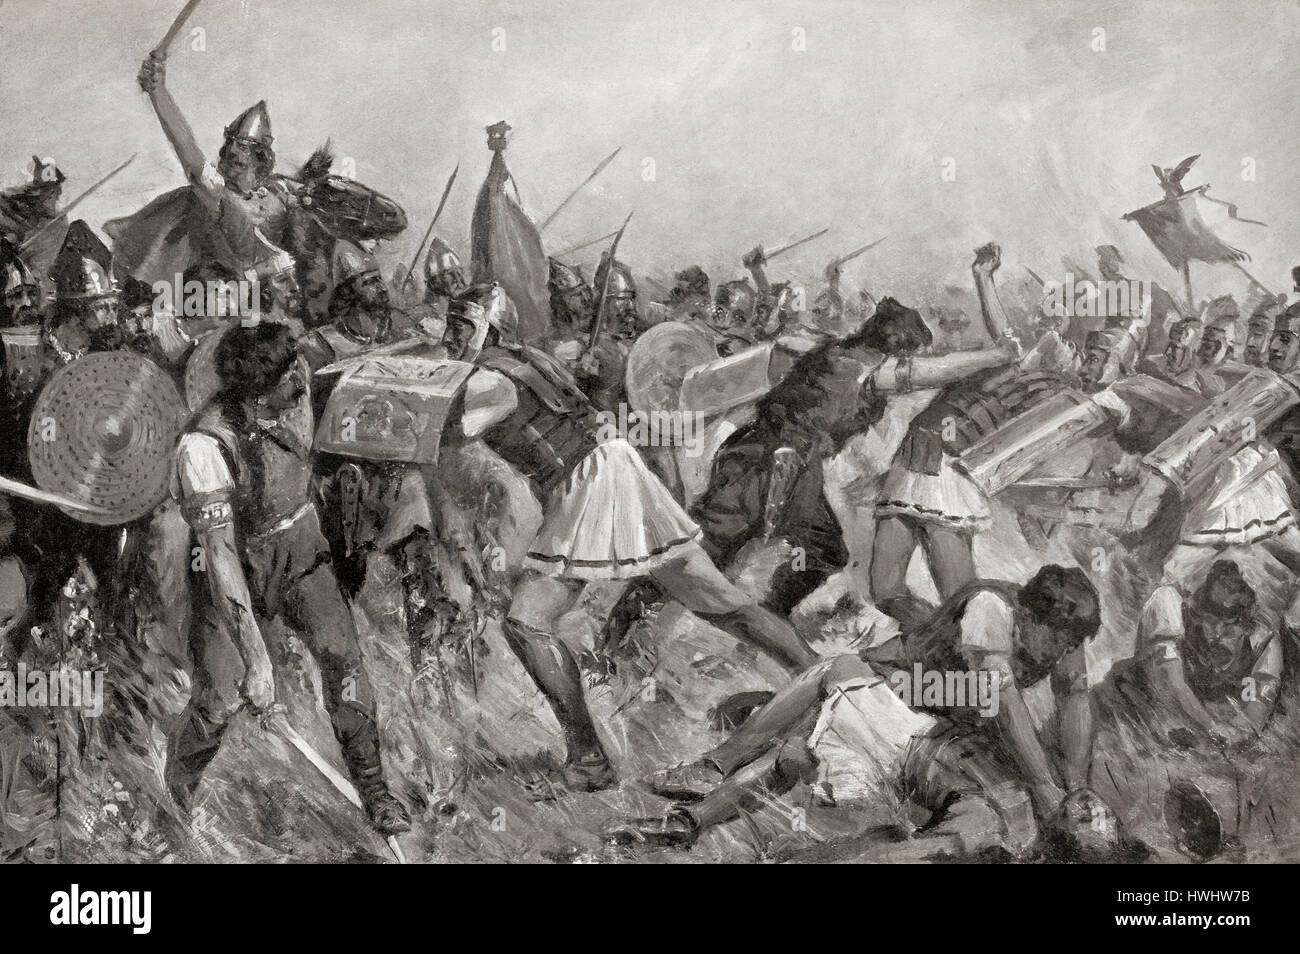 The Battle of Telamon between the Roman Republic and an alliance of Celtic tribes in 225 BC.  After the painting by Allan Stewart, (1865-1951).  From Hutchinson's History of the Nations, published 1915. Stock Photo